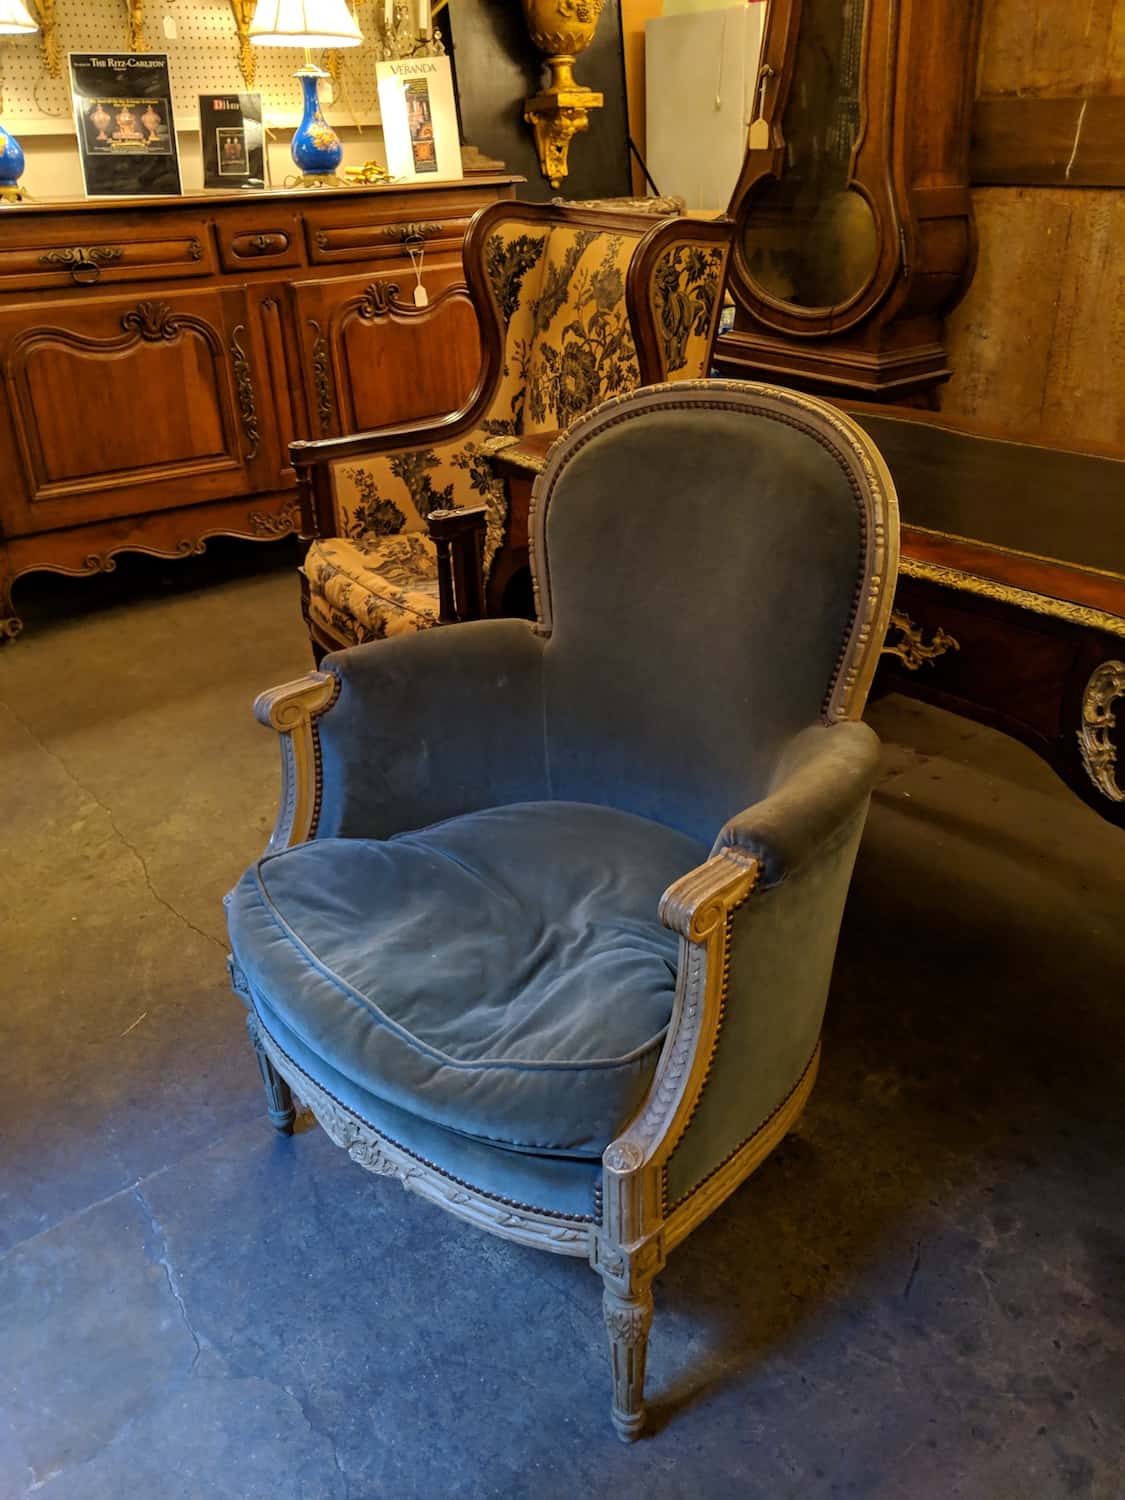 Re-upholstered, this chair will reclaim its former glorty